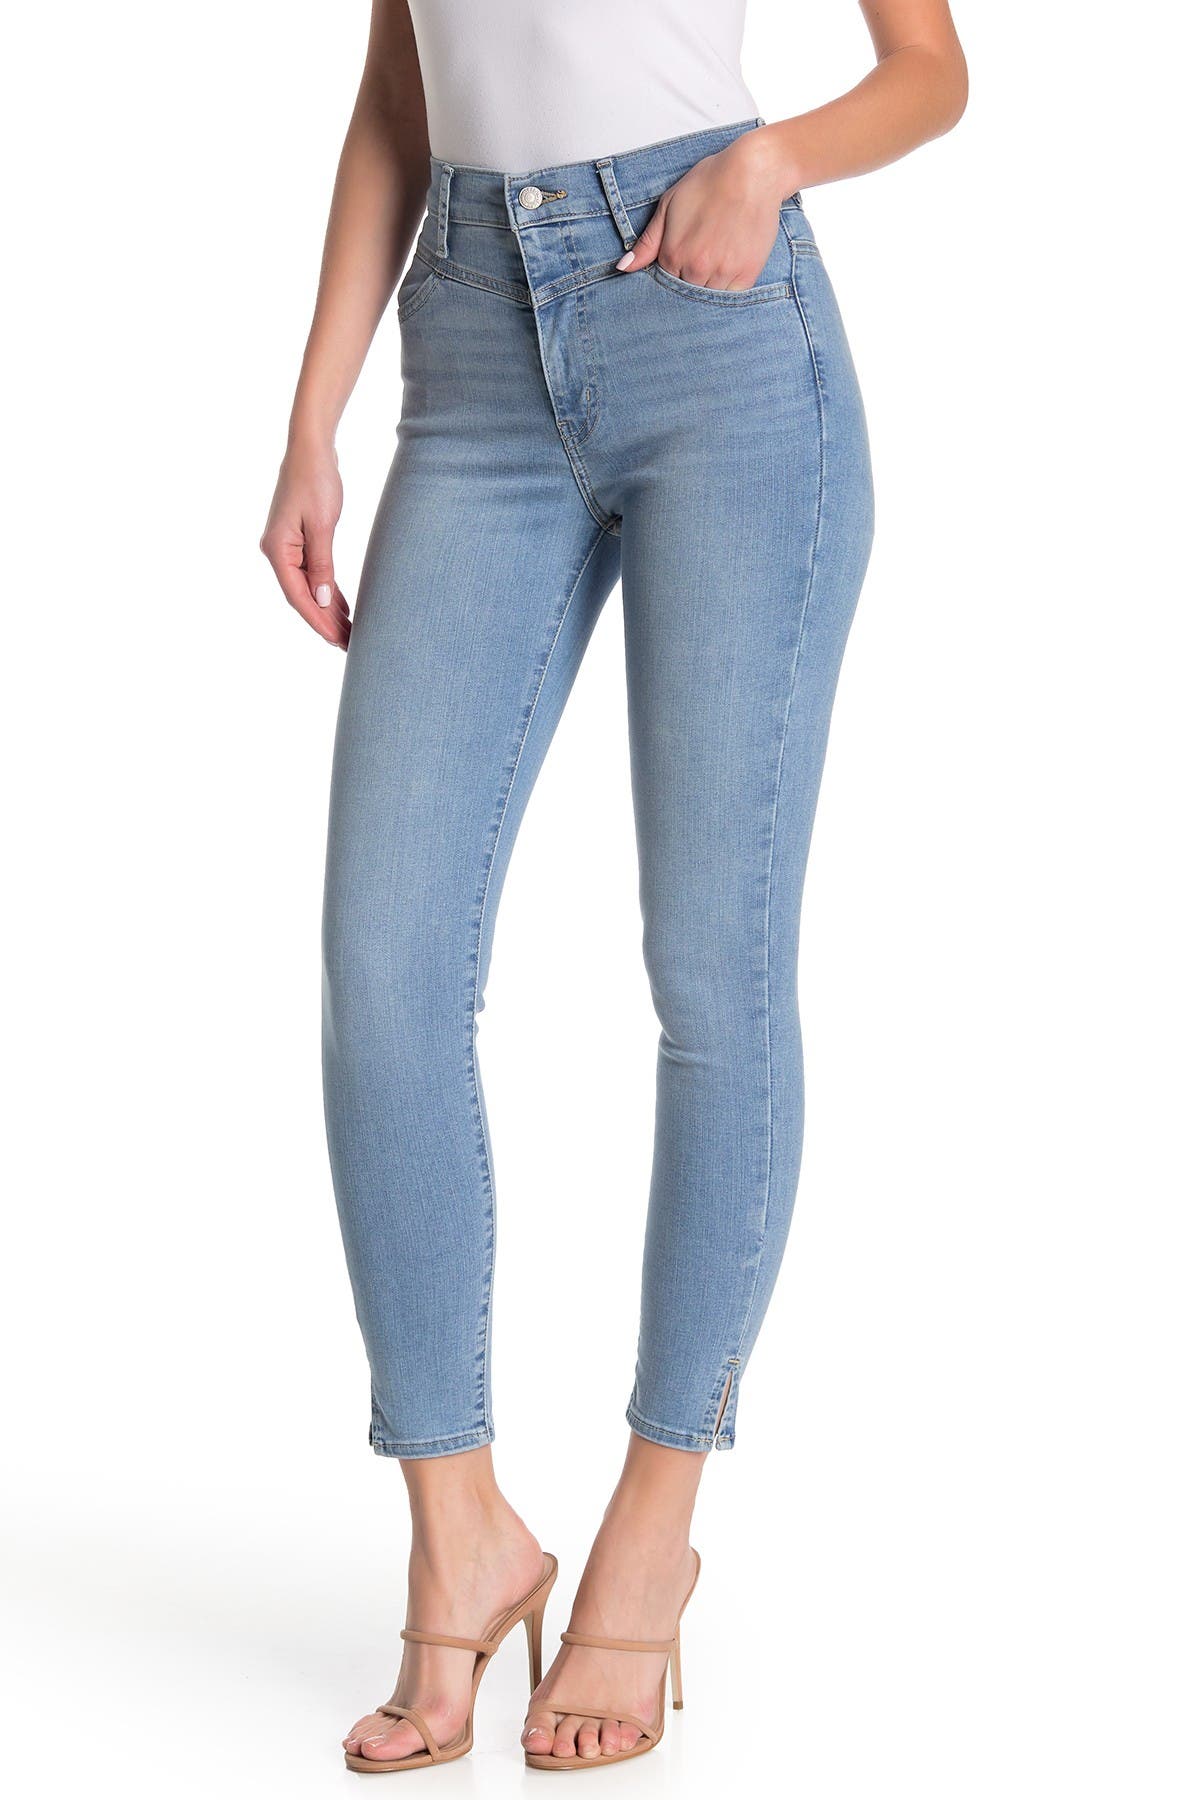 Levi's | Mile High Booty Skinny Jeans 